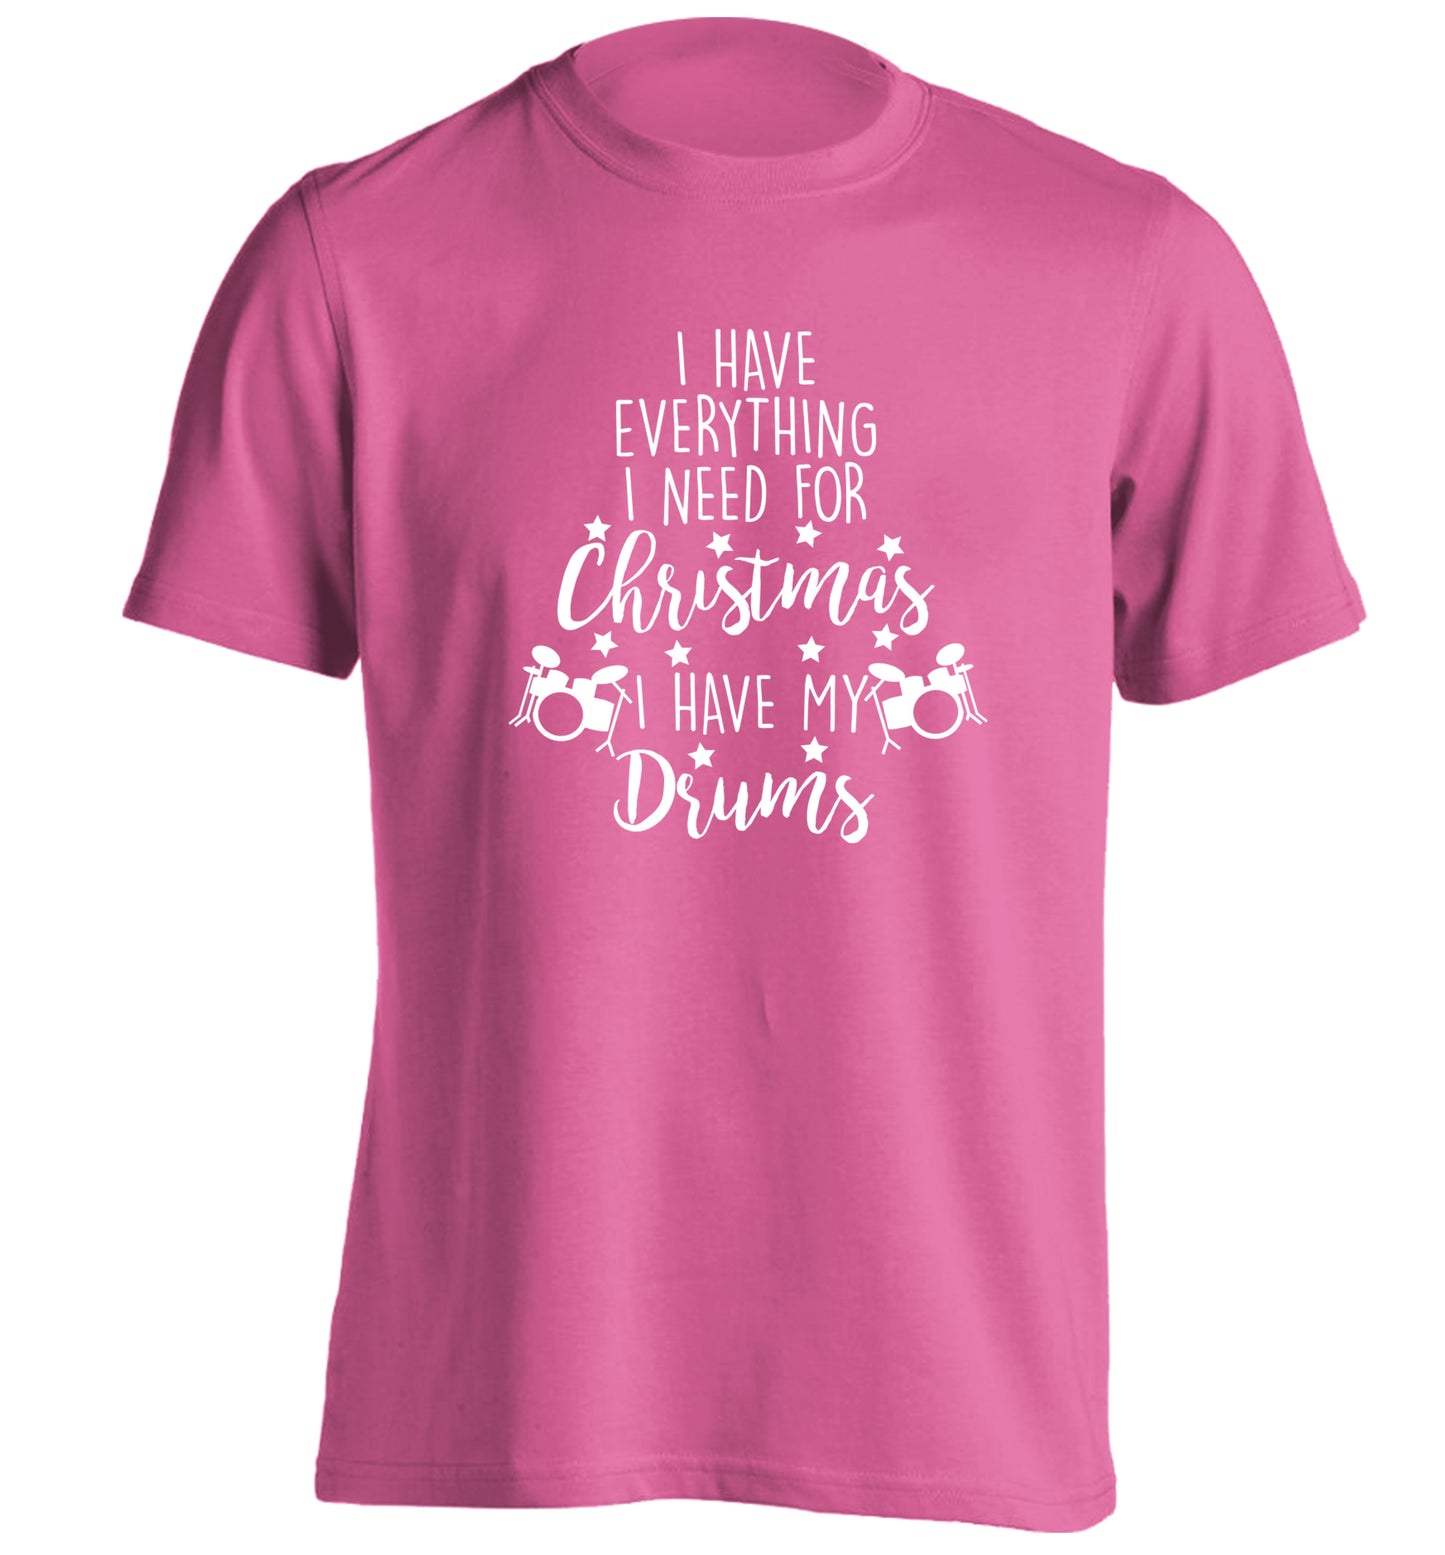 I have everything I need for Christmas I have my drums! adults unisex pink Tshirt 2XL